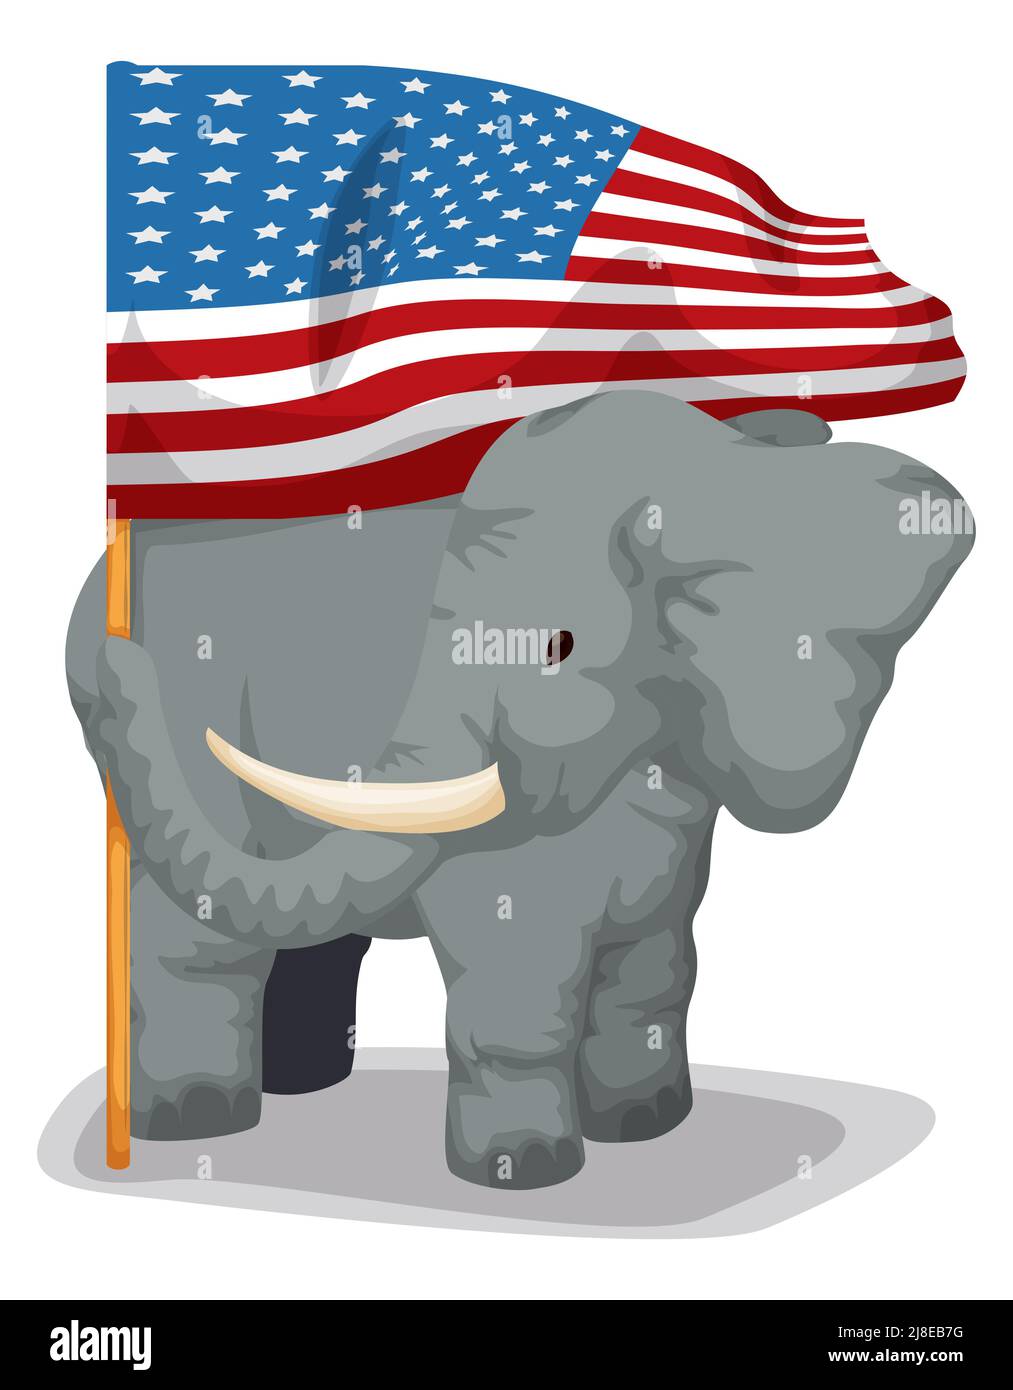 Big, cute and smiling elephant with a vote in its trunk, exercising the suffrage during elections. Stock Vector